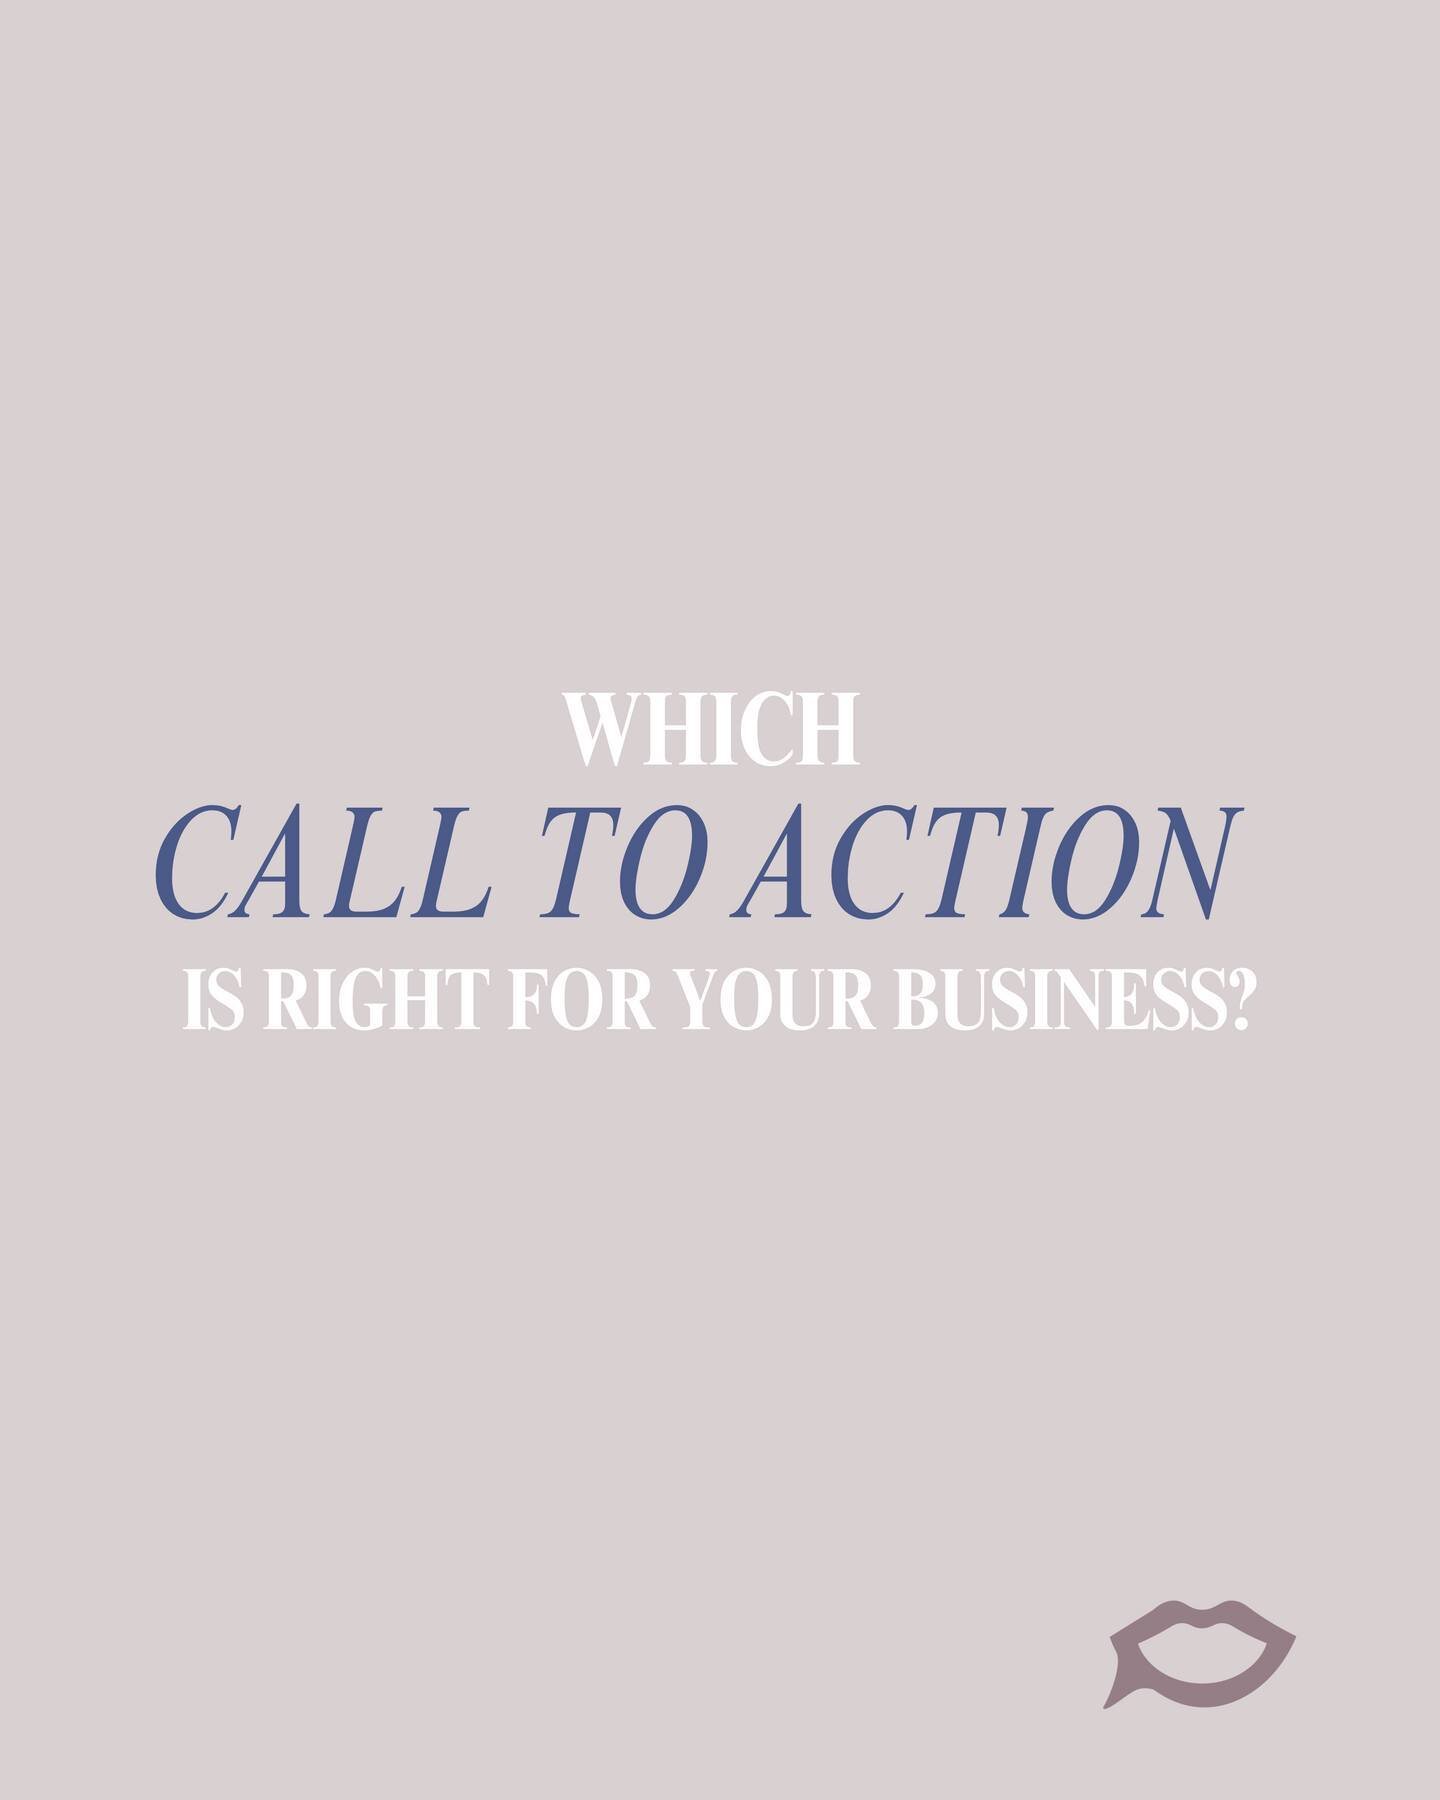 Selecting a call to action for your business: a small decision with a big impact on your business' success. 

#CTA #SMM #YallaPR #MarketingAgency #ColumbusGeorgia #socialmediaagency